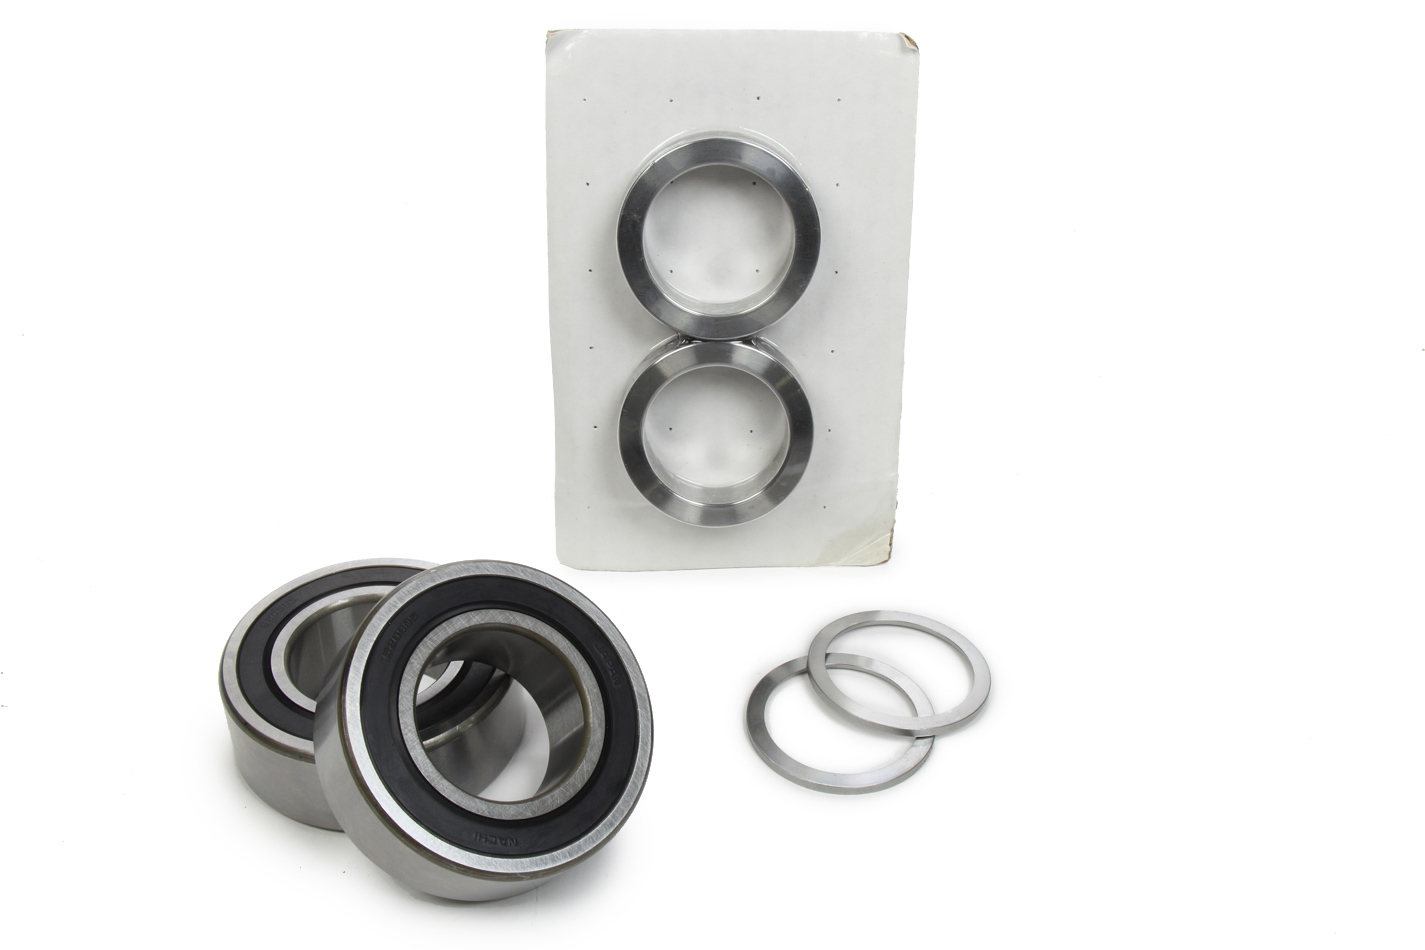 Mark Williams 58508 - Axle Bearing Set - For HD Symmetrical Hsg. Ends